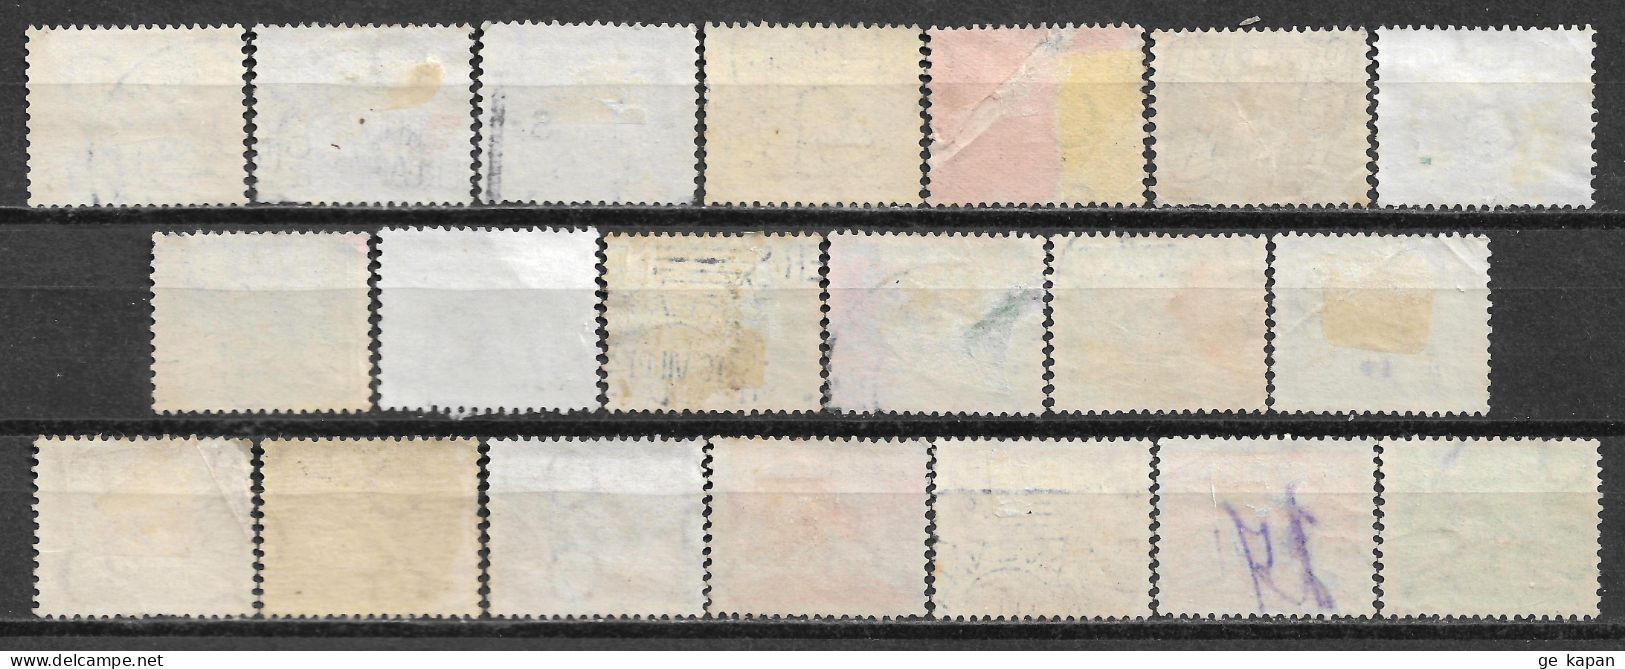 1940-1941 NETHERLANDS SET OF 20 USED STAMPS (Scott # 226,228,243A,243C,243E,243K,243P) CV $4.60 - Used Stamps